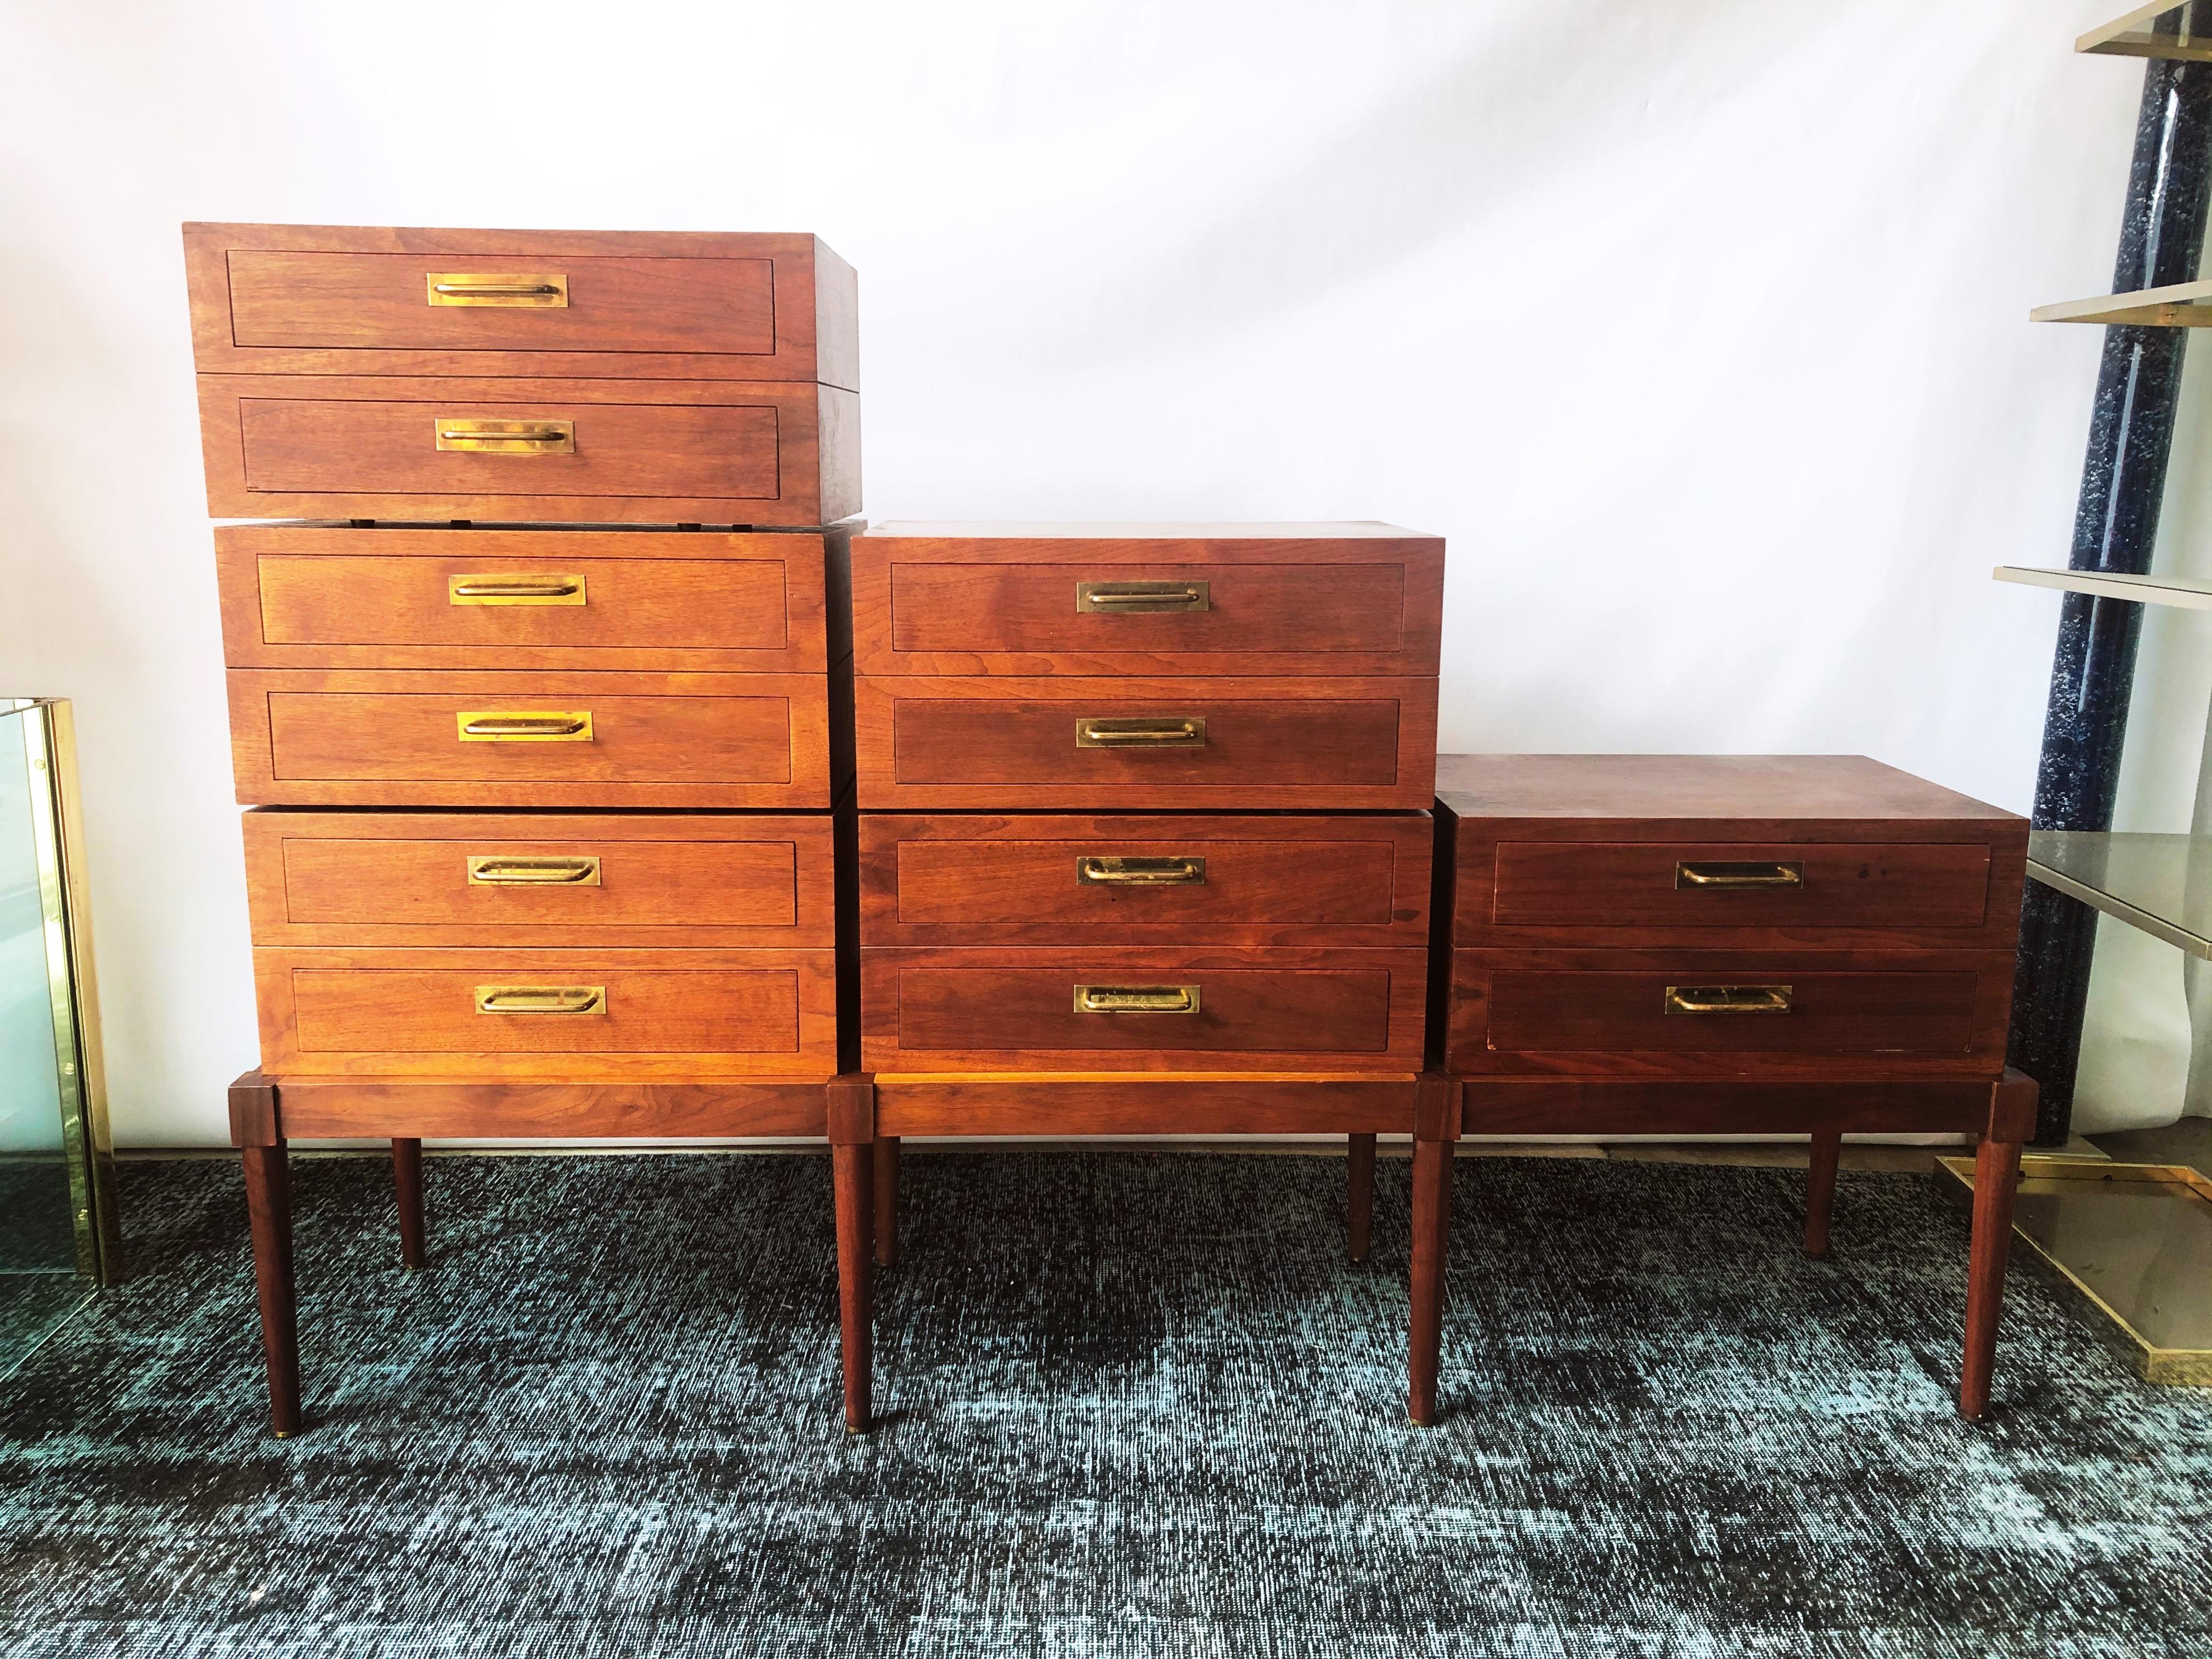 This mid-century modern six-piece walnut modular drawer set is in overall good condition and wear consistent with age and use.  These six piece units can be arranged in multiple variations. (Shown in photos).  Beautifully aged brass hardware.